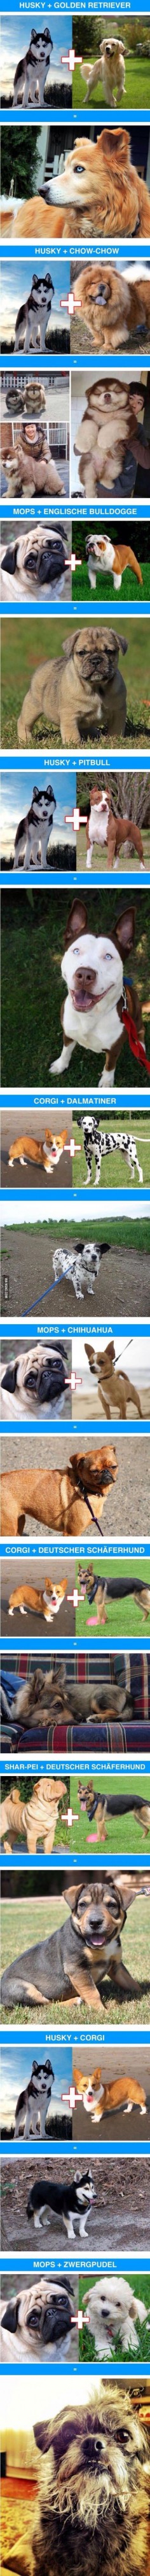 Some dog breeds mixed with others.